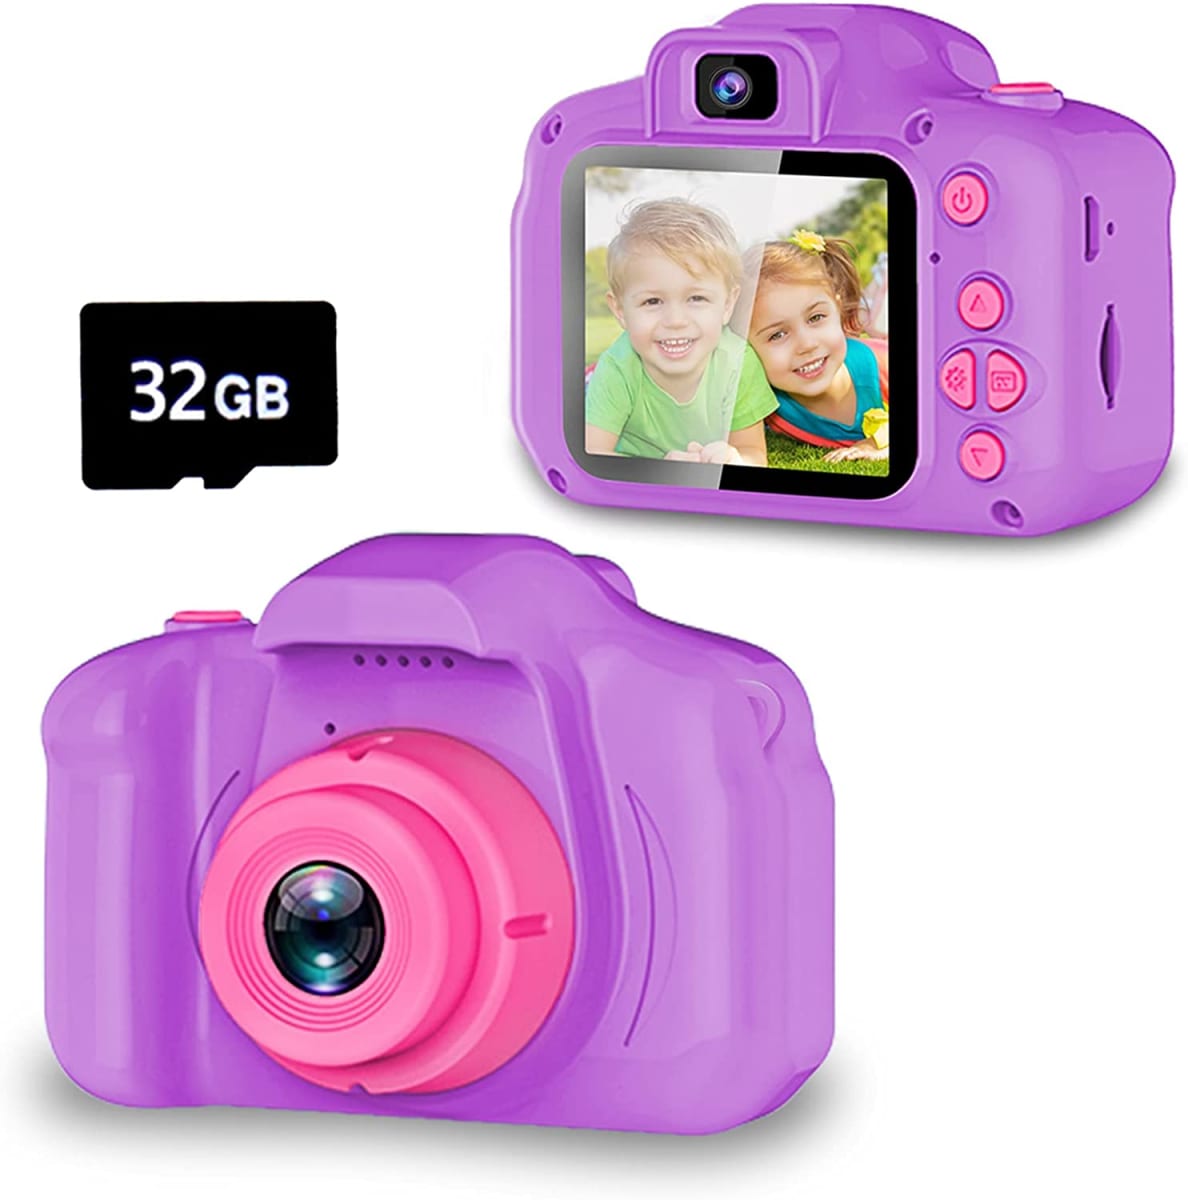 Upgrade Kids Selfie Camera, Christmas Birthday Gifts for Boys Age 3-9, HD Digital Video Cameras for Toddler, Portable Toy for 3 4 5 6 7 8 Year Old Boy with 32GB SD Card